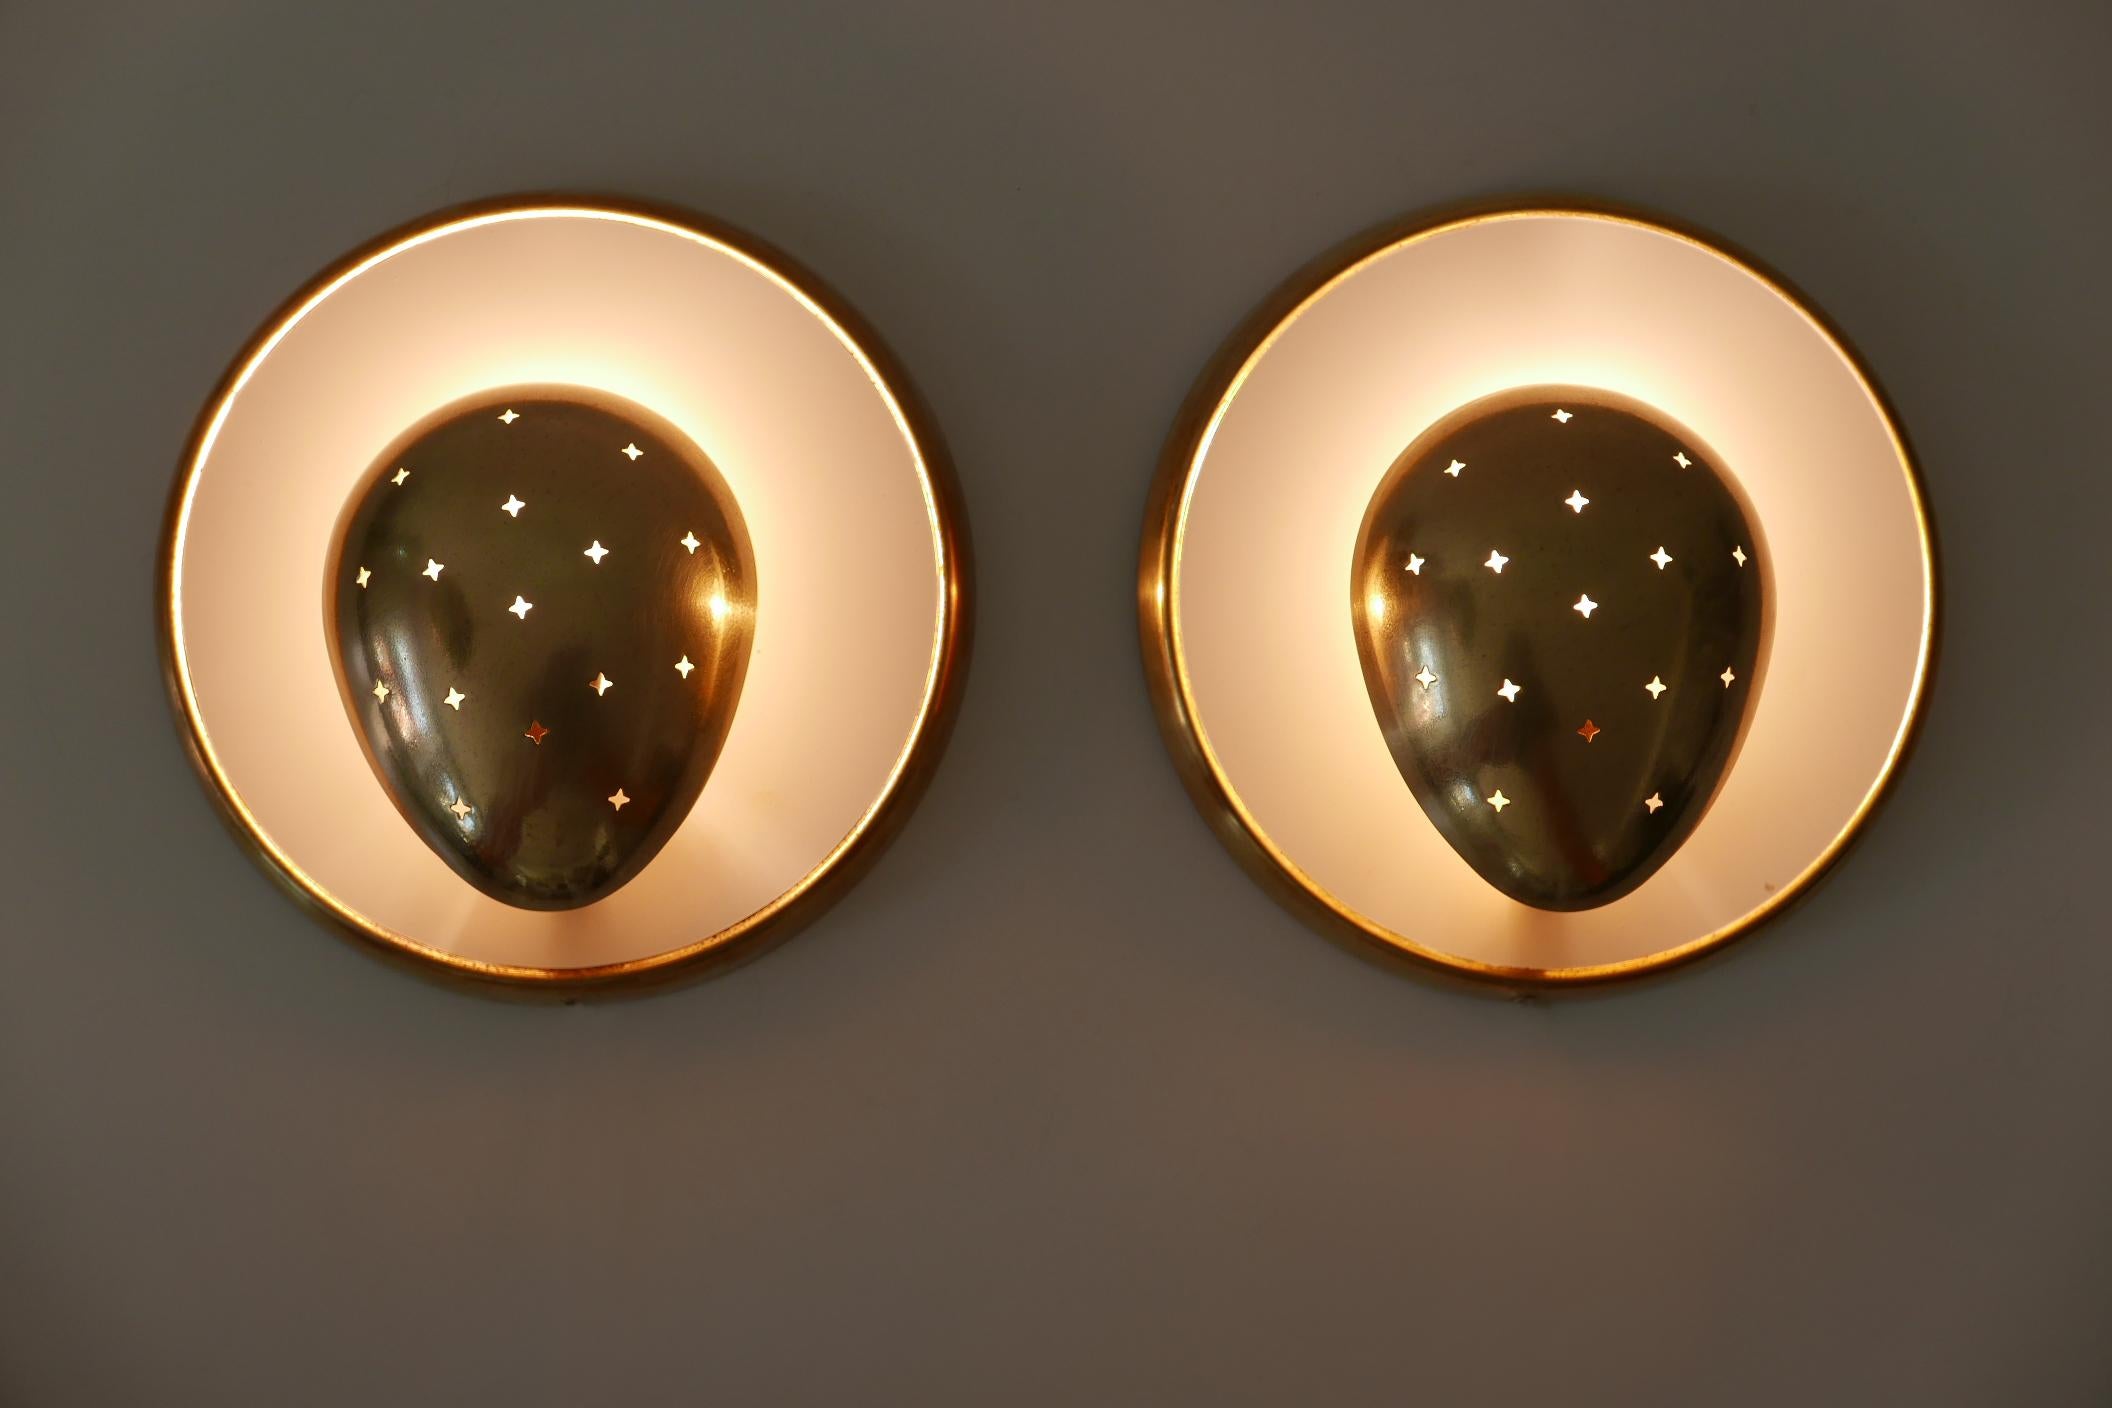 Set of two extremely rare and beautiful Mid-Century Modern brass wall lamps or sconces. Designed and manufactured probably in France, 1950s.

The lamps are executed in partly white enameled and perforated brass and each lamp needs 1 x E14 Edison